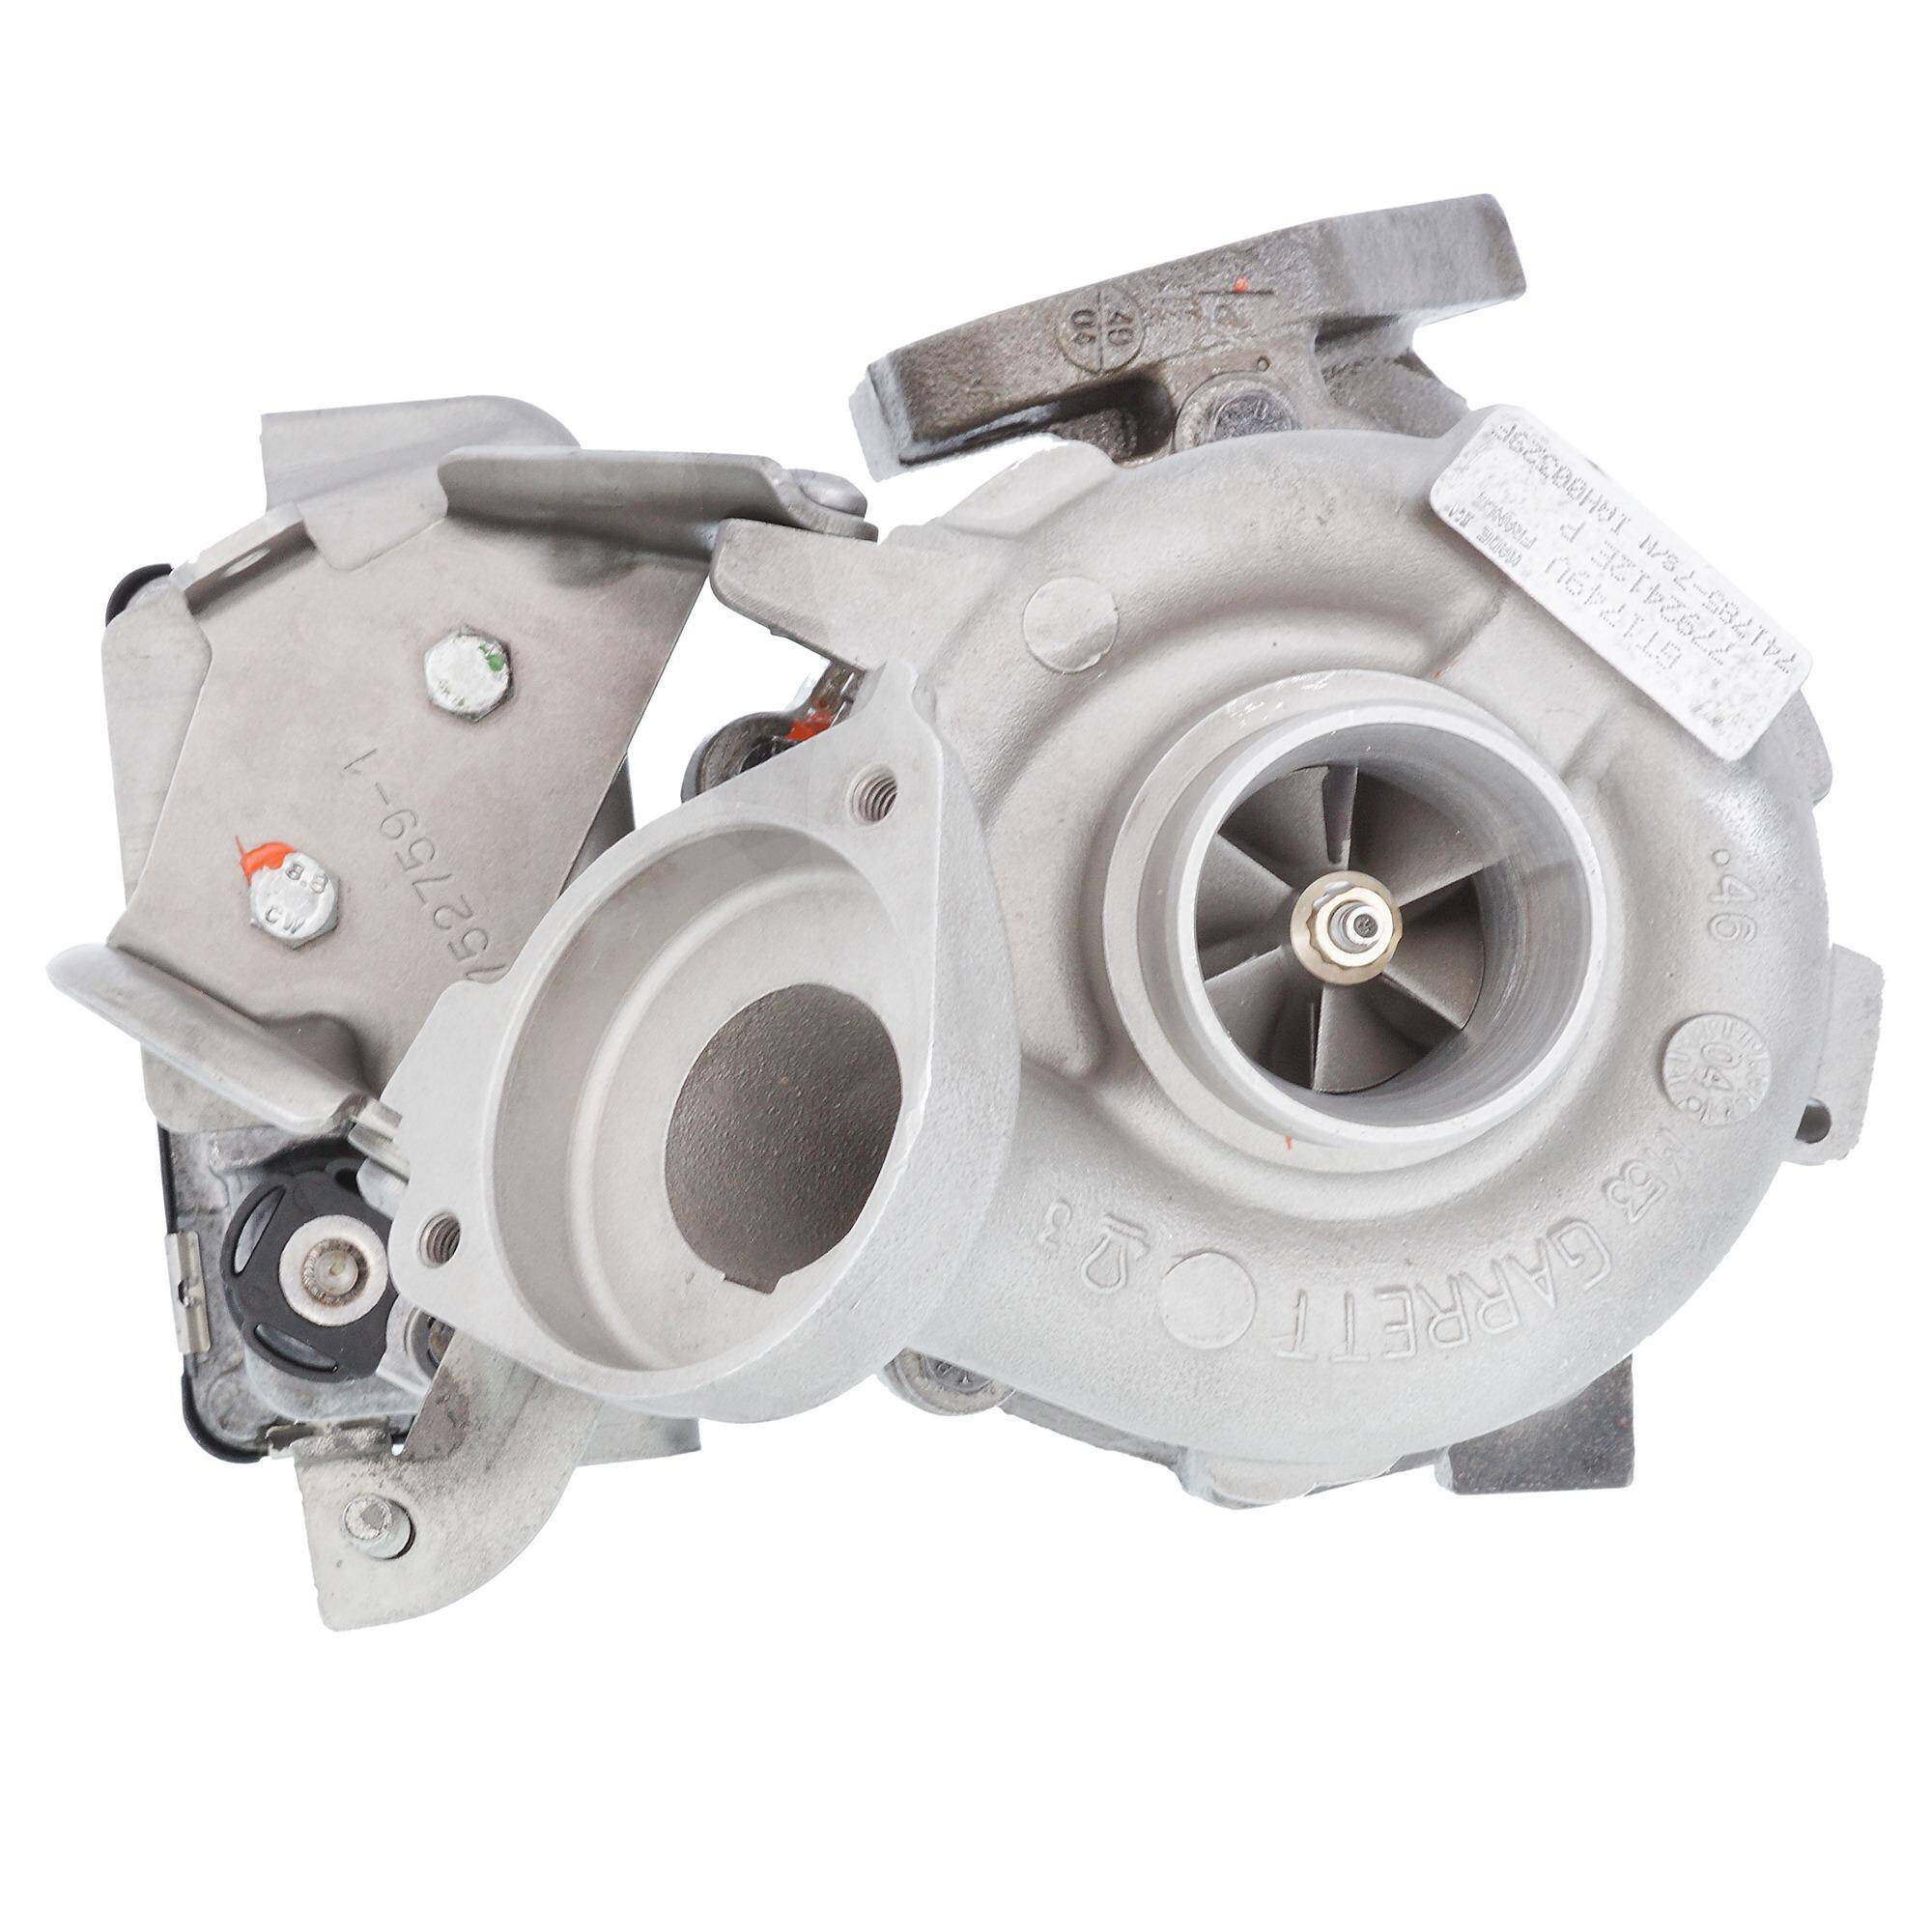 TURBOCHARGER TURBO REMANUFACTURED 741785-10 13 14 7792412 741785-10/13/14